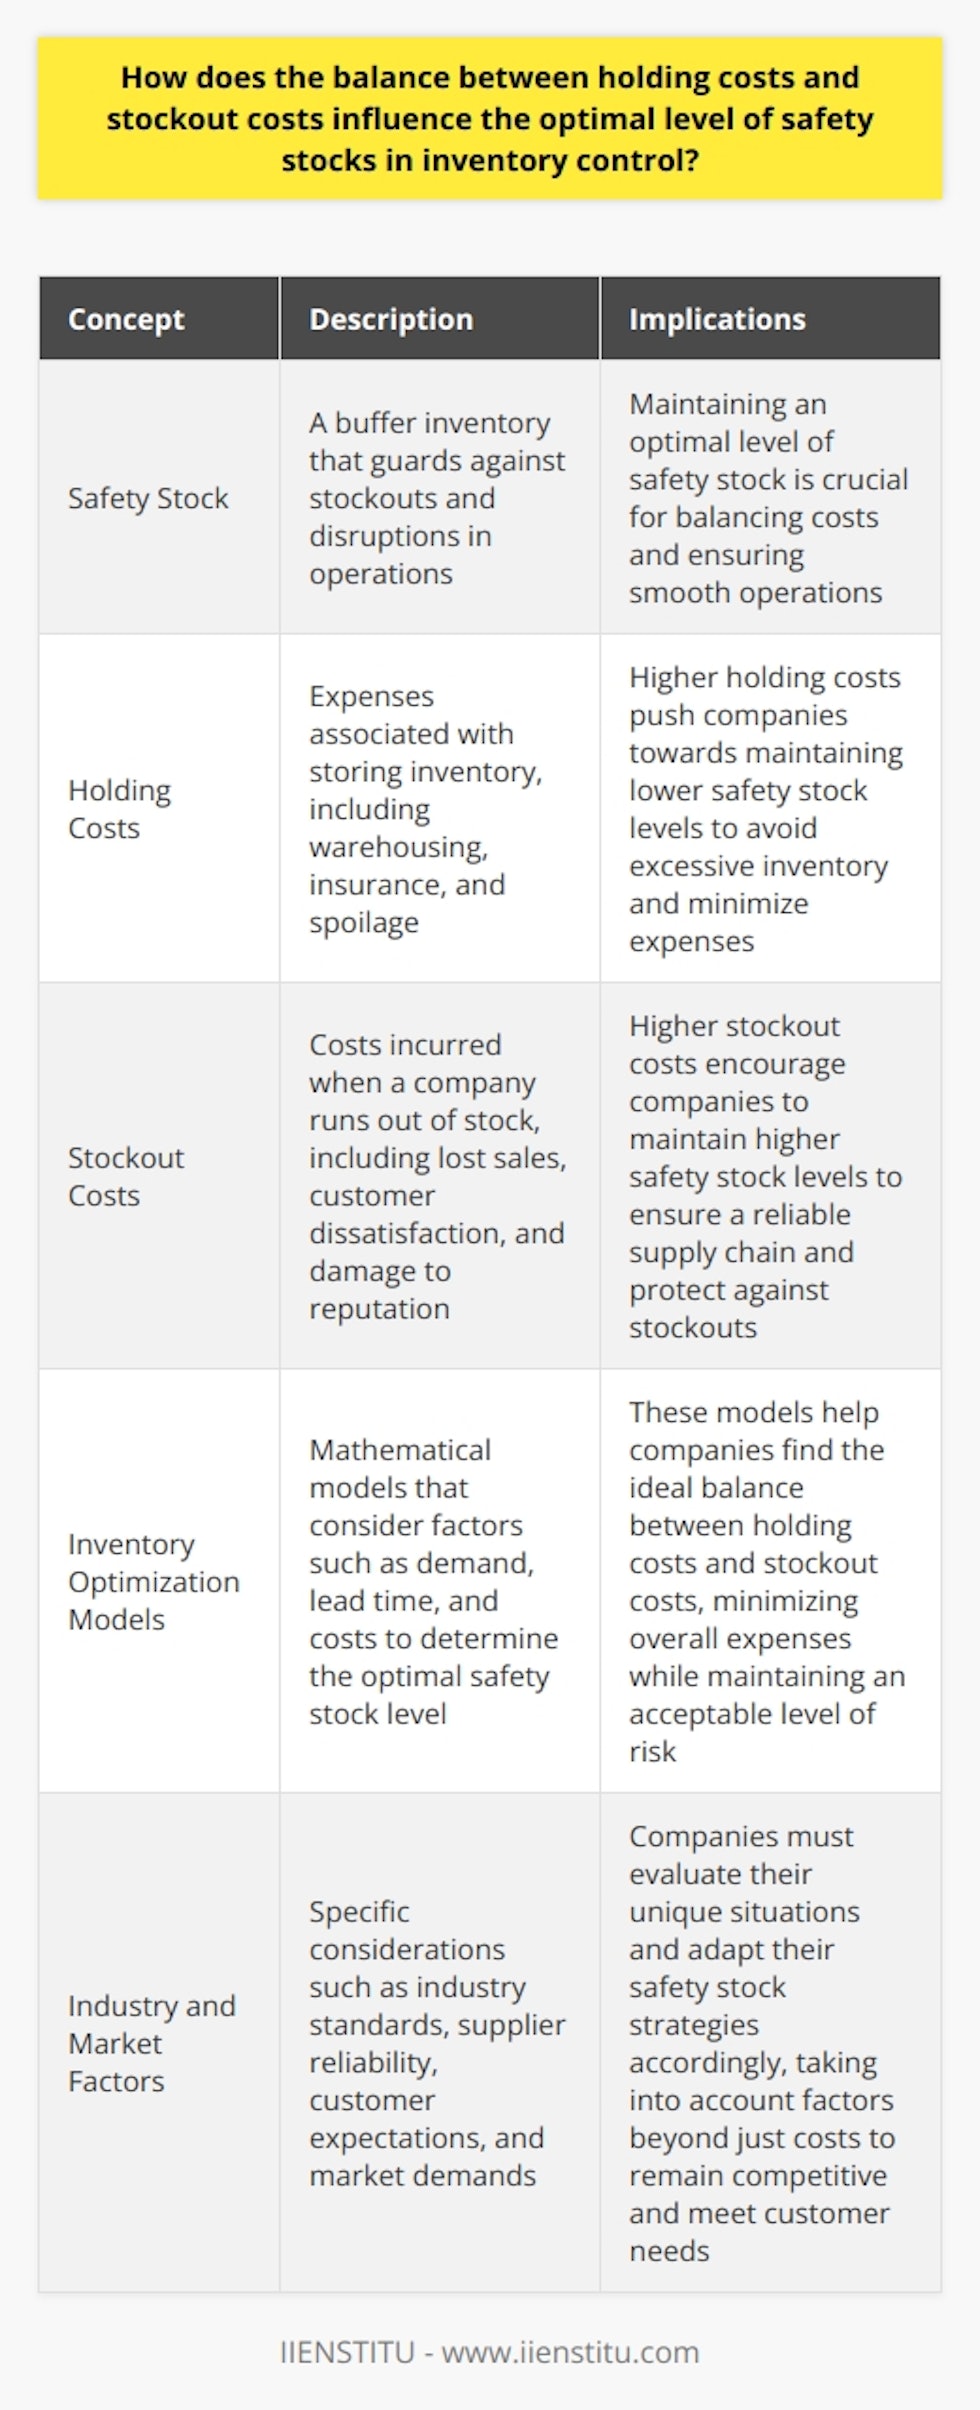 Explaining Safety Stocks Safety stock acts as a buffer. It guards against stockouts. Stockouts disrupt operations. They also disappoint customers. Inventory control focuses on balancing risks. It seeks an optimal safety stock level. This balance reduces overall costs. The Costs Involved Two primary costs matter here. They are holding costs and stockout costs. Holding Costs Holding costs cover storage and related expenses. These include warehousing, insurance, and spoilage. High inventory levels lead to high holding costs. Every extra unit carries a cost. Stockout Costs Stockout costs come from not having stock. They include lost sales and customer dissatisfaction. They may also hurt reputation. Stockouts can erode customer trust. The Balancing Act Inventory control optimizes the stock level. It reduces cumulative costs. Optimization is complex. It requires precise calculations. Companies use inventory models. The models consider various factors. Demand, lead time, and costs are primary factors. Calculating Safety Stocks Calculations should minimize risk. They should reduce the likelihood of stockouts. They do not aim for zero risk. That would require excessive inventory. It would inflate holding costs unreasonably. Formulas take in demand variability. They also account for lead time uncertainty. They give an ideal safety stock level. This level balances costs effectively. Effects on Optimal Safety Stock Levels Higher holding costs push towards lower safety stocks. The cost per unit stored is significant. Companies lean towards less inventory. They avoid overstocking. In contrast, higher stockout costs push the other way. Reliability matters to customers. A reliable supply chain becomes a priority. Companies may hold more safety stock. This protects against stockouts. Balancing these costs, a middle ground emerges. The optimal safety stock level is not static. It reflects an individual companys costs. It also reflects risk tolerance and market demands. Practical Considerations Companies must evaluate their specific situation. They consider industry standards. They assess supplier reliability. They also consider customer expectations. This leads to tailored inventory strategies. Costs are not the sole factor.   Flexibility ,  responsiveness , and  service levels  also weigh in. They impact safety stock decisions. In Conclusion The balance affects safety stock levels considerably. Companies seek to minimize total costs. They want to serve customers well. Optimal safety stock is a moving target. It shifts with changes in holding costs, stockout costs, and market conditions. Inventory control is an ongoing process. It requires assessment and adaptation.